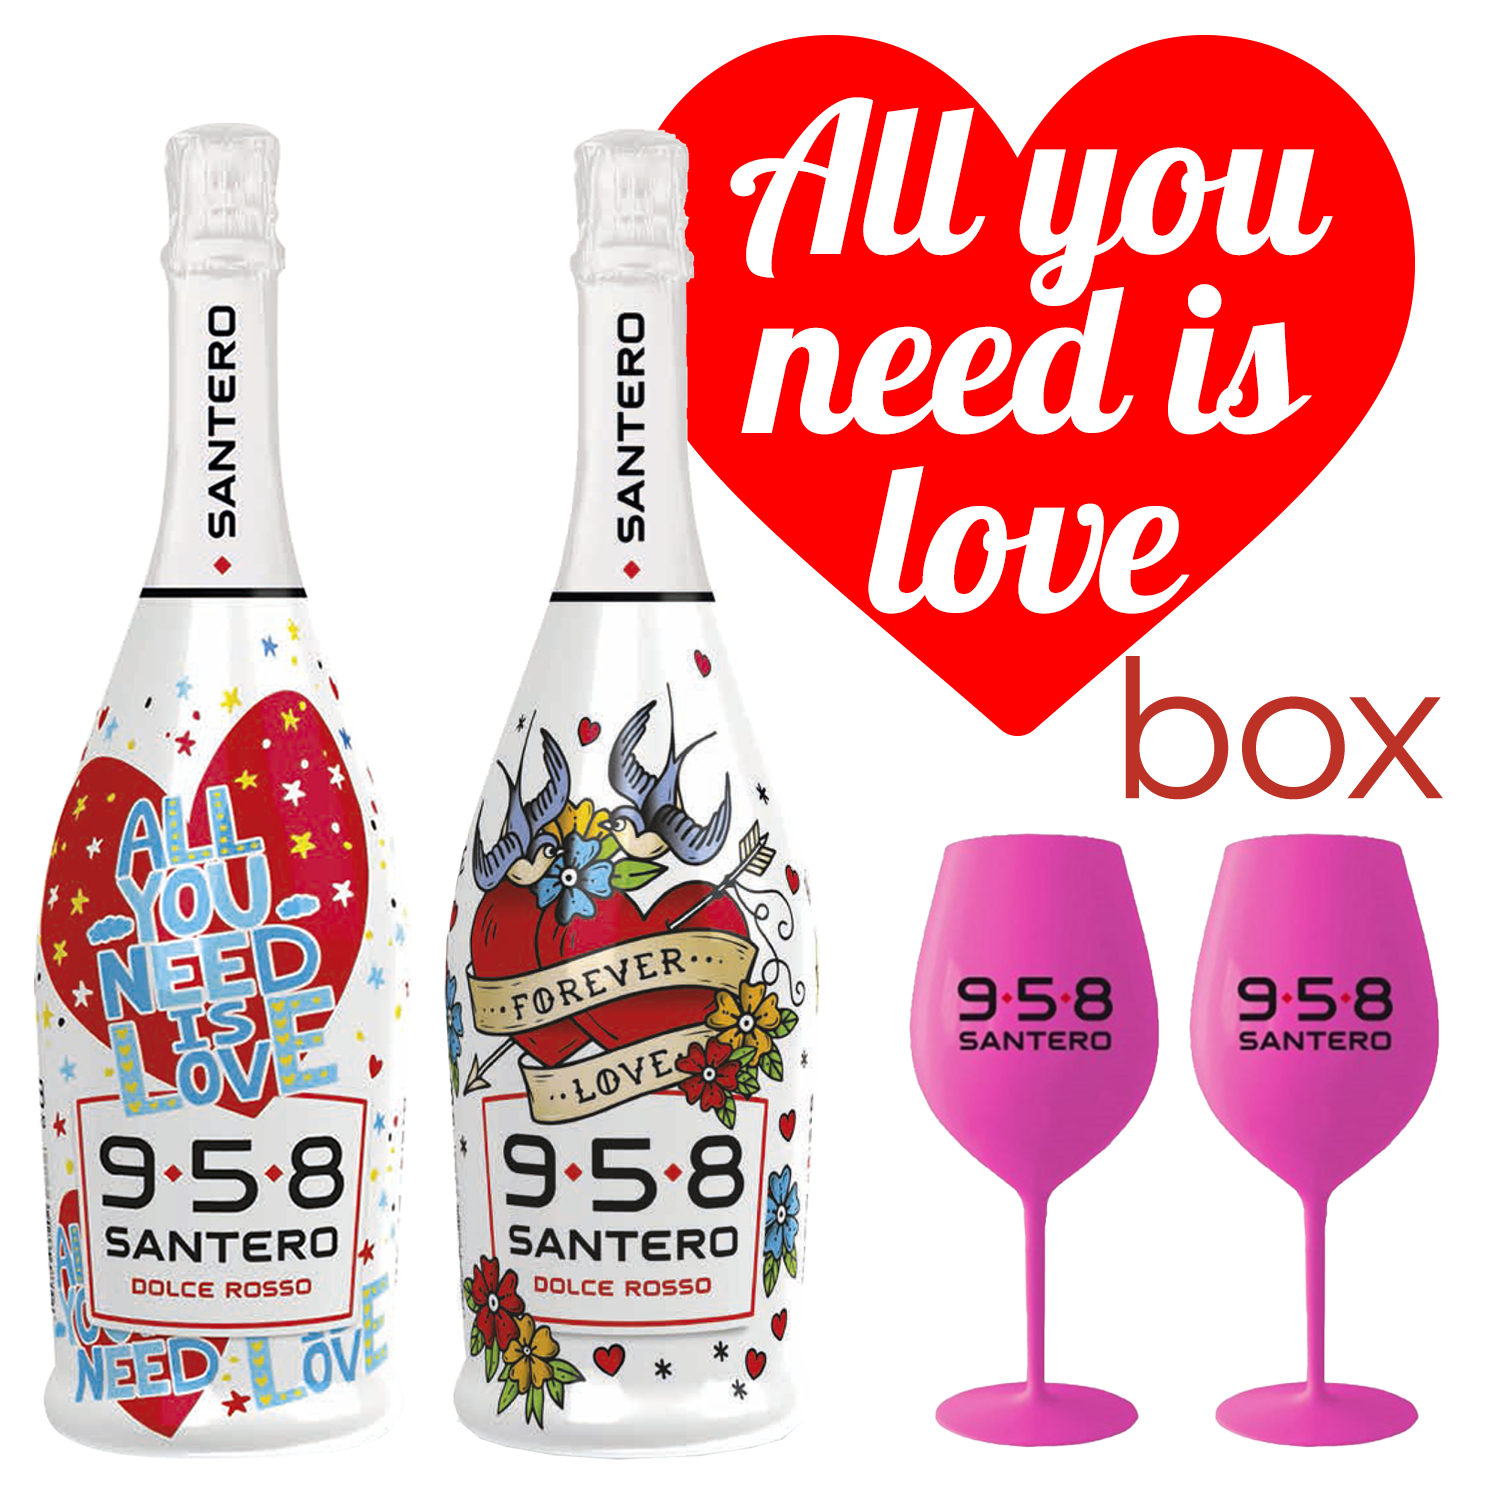 All You Need Is Love Box